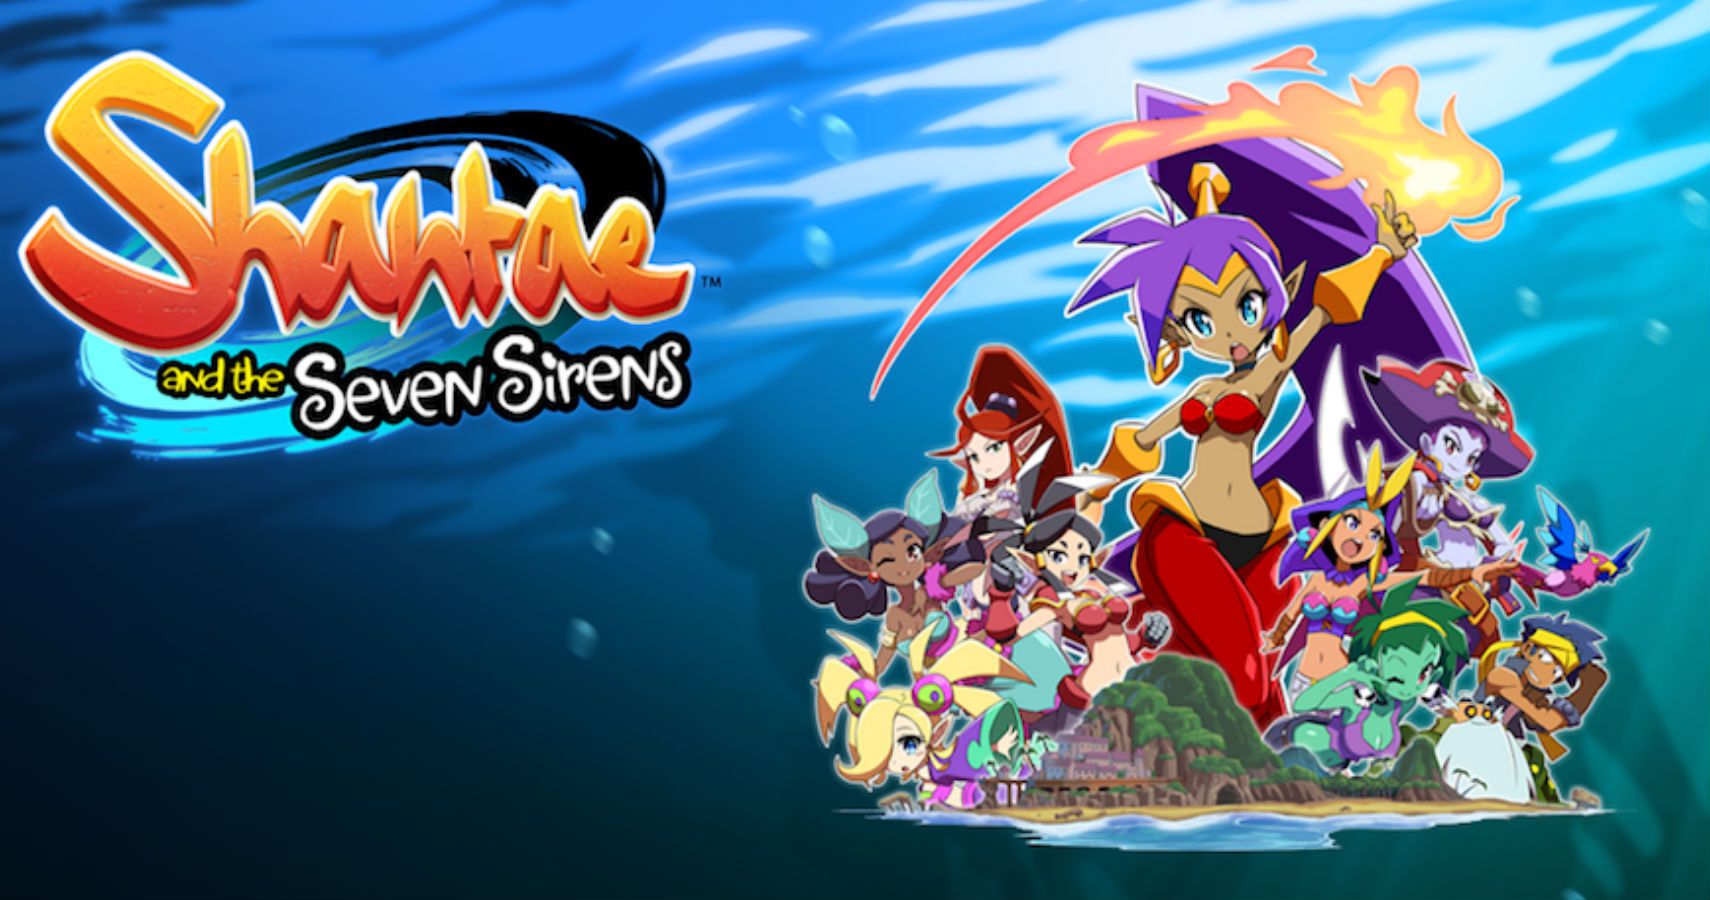 shantae-and-the-seven-sirens-is-available-on-apple-arcade-as-a-mobile-game